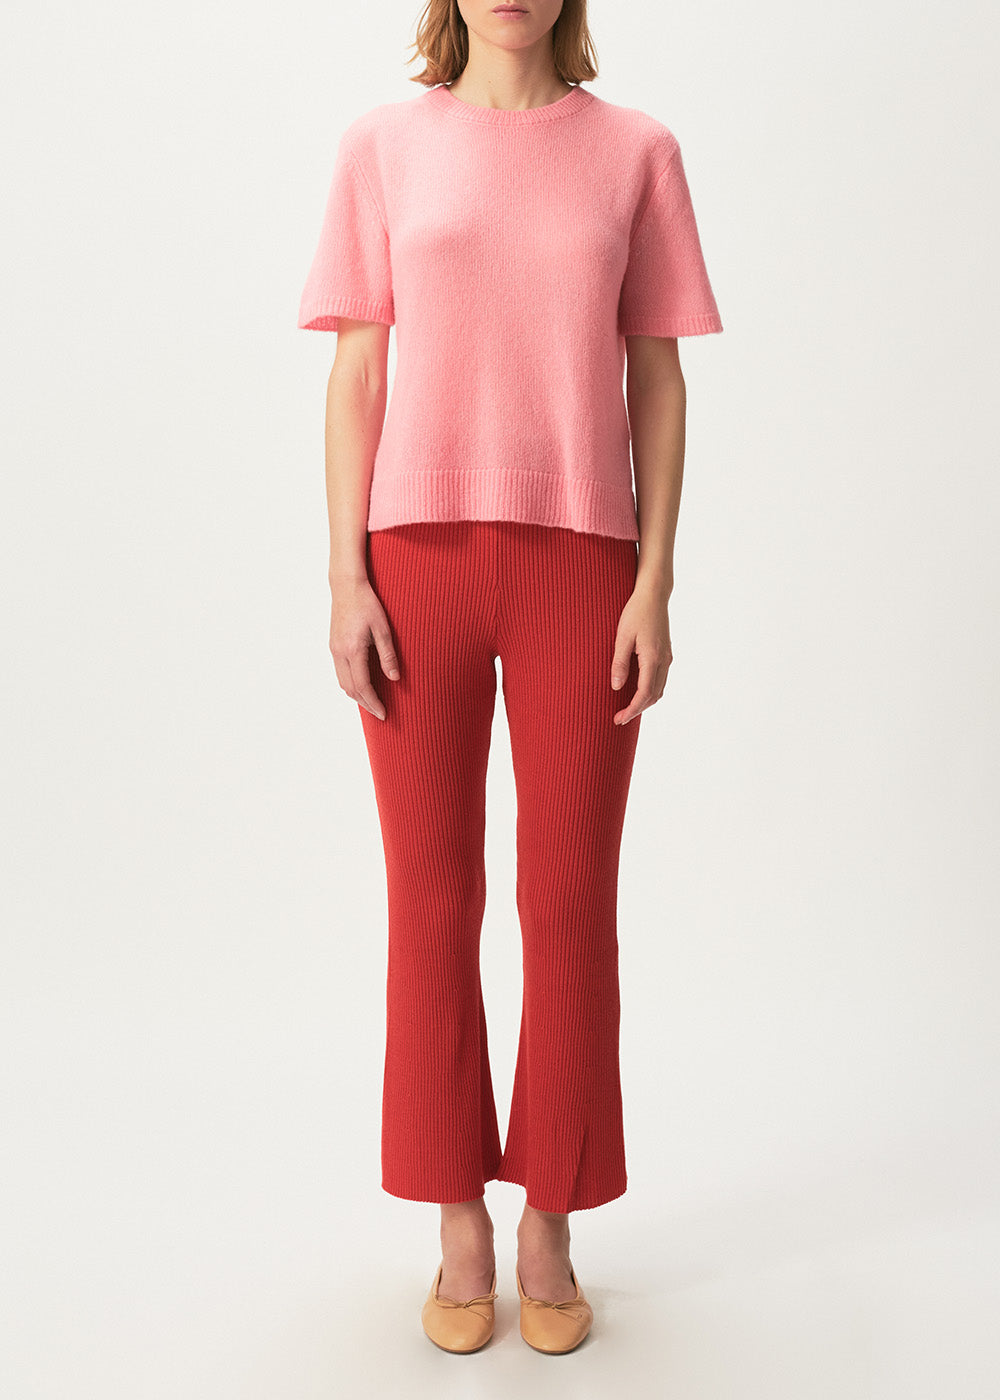 Tilly Flared Trousers - Medium / Cherry